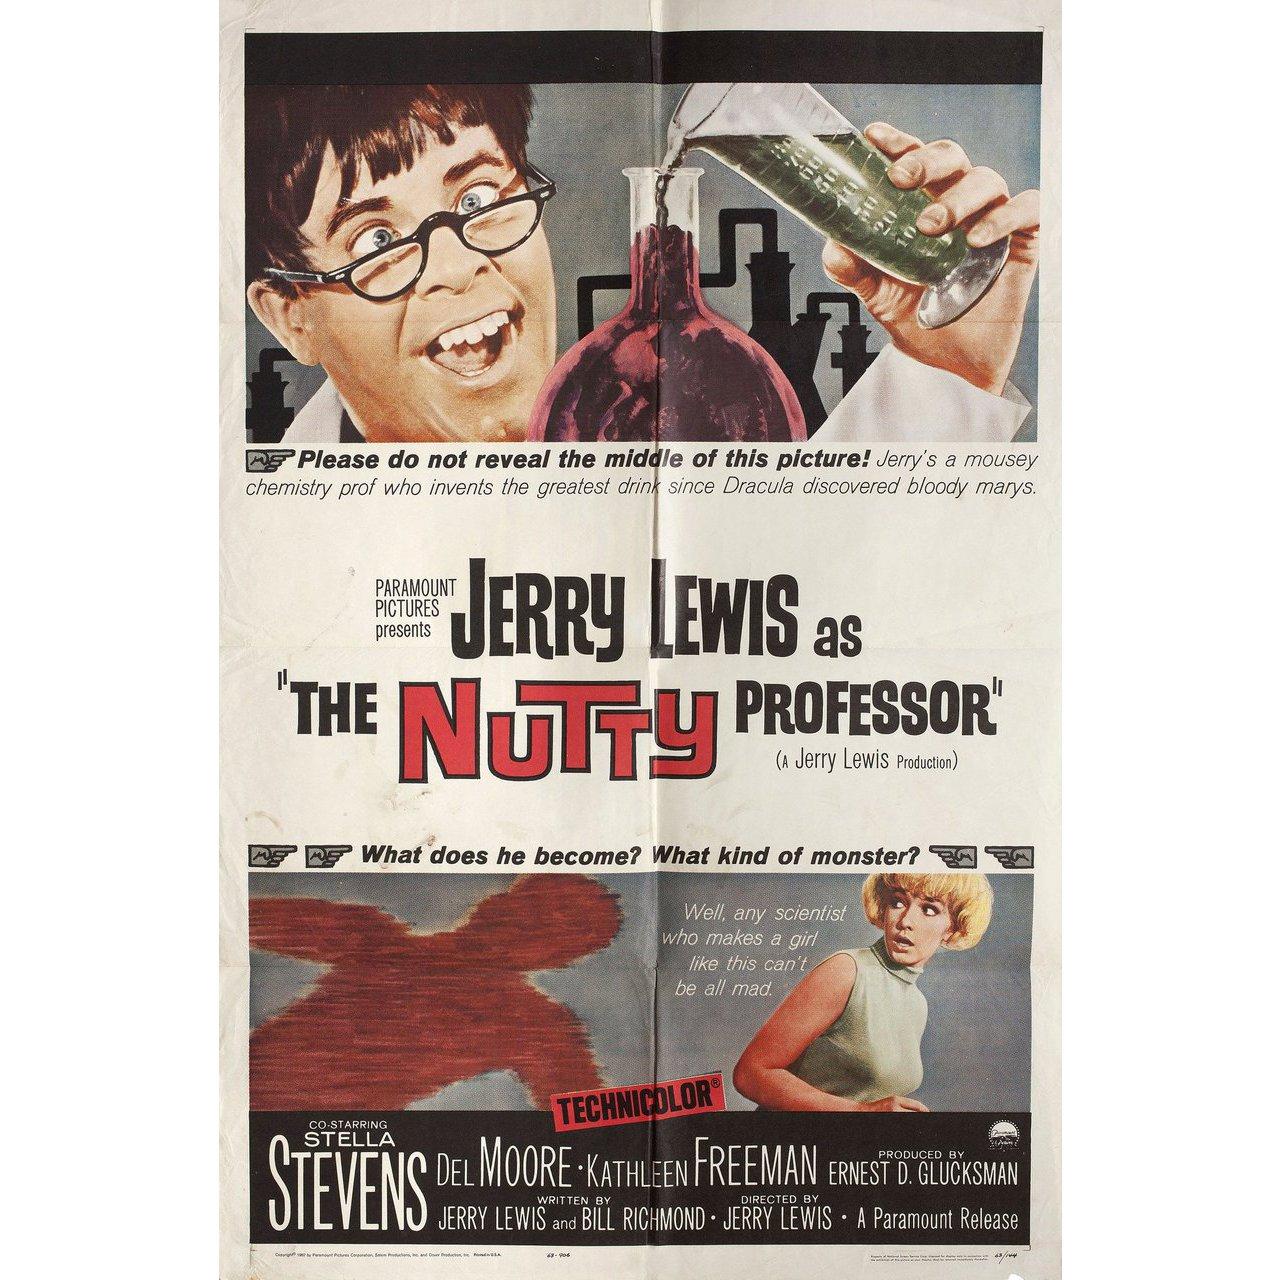 Original 1963 U.S. one sheet poster for the film “The Nutty Professor” directed by Jerry Lewis with Jerry Lewis / Stella Stevens / Del Moore / Kathleen Freeman. Good condition, folded with stains. Many original posters were issued folded or were